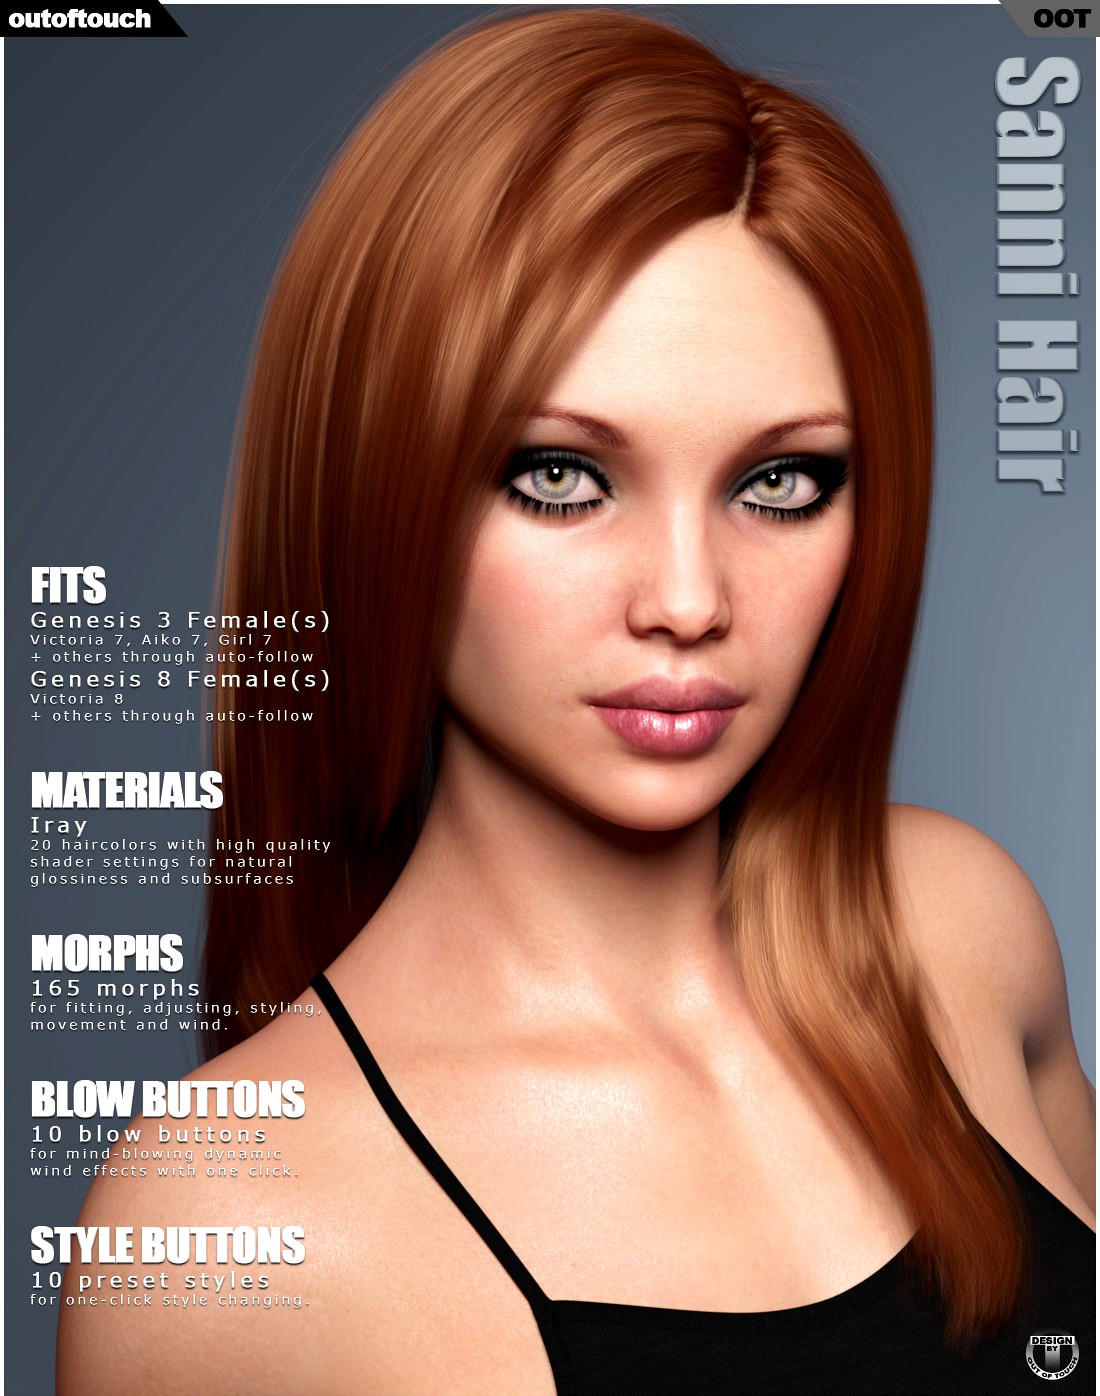 Sanni Hair for Genesis 3 and 8 Females